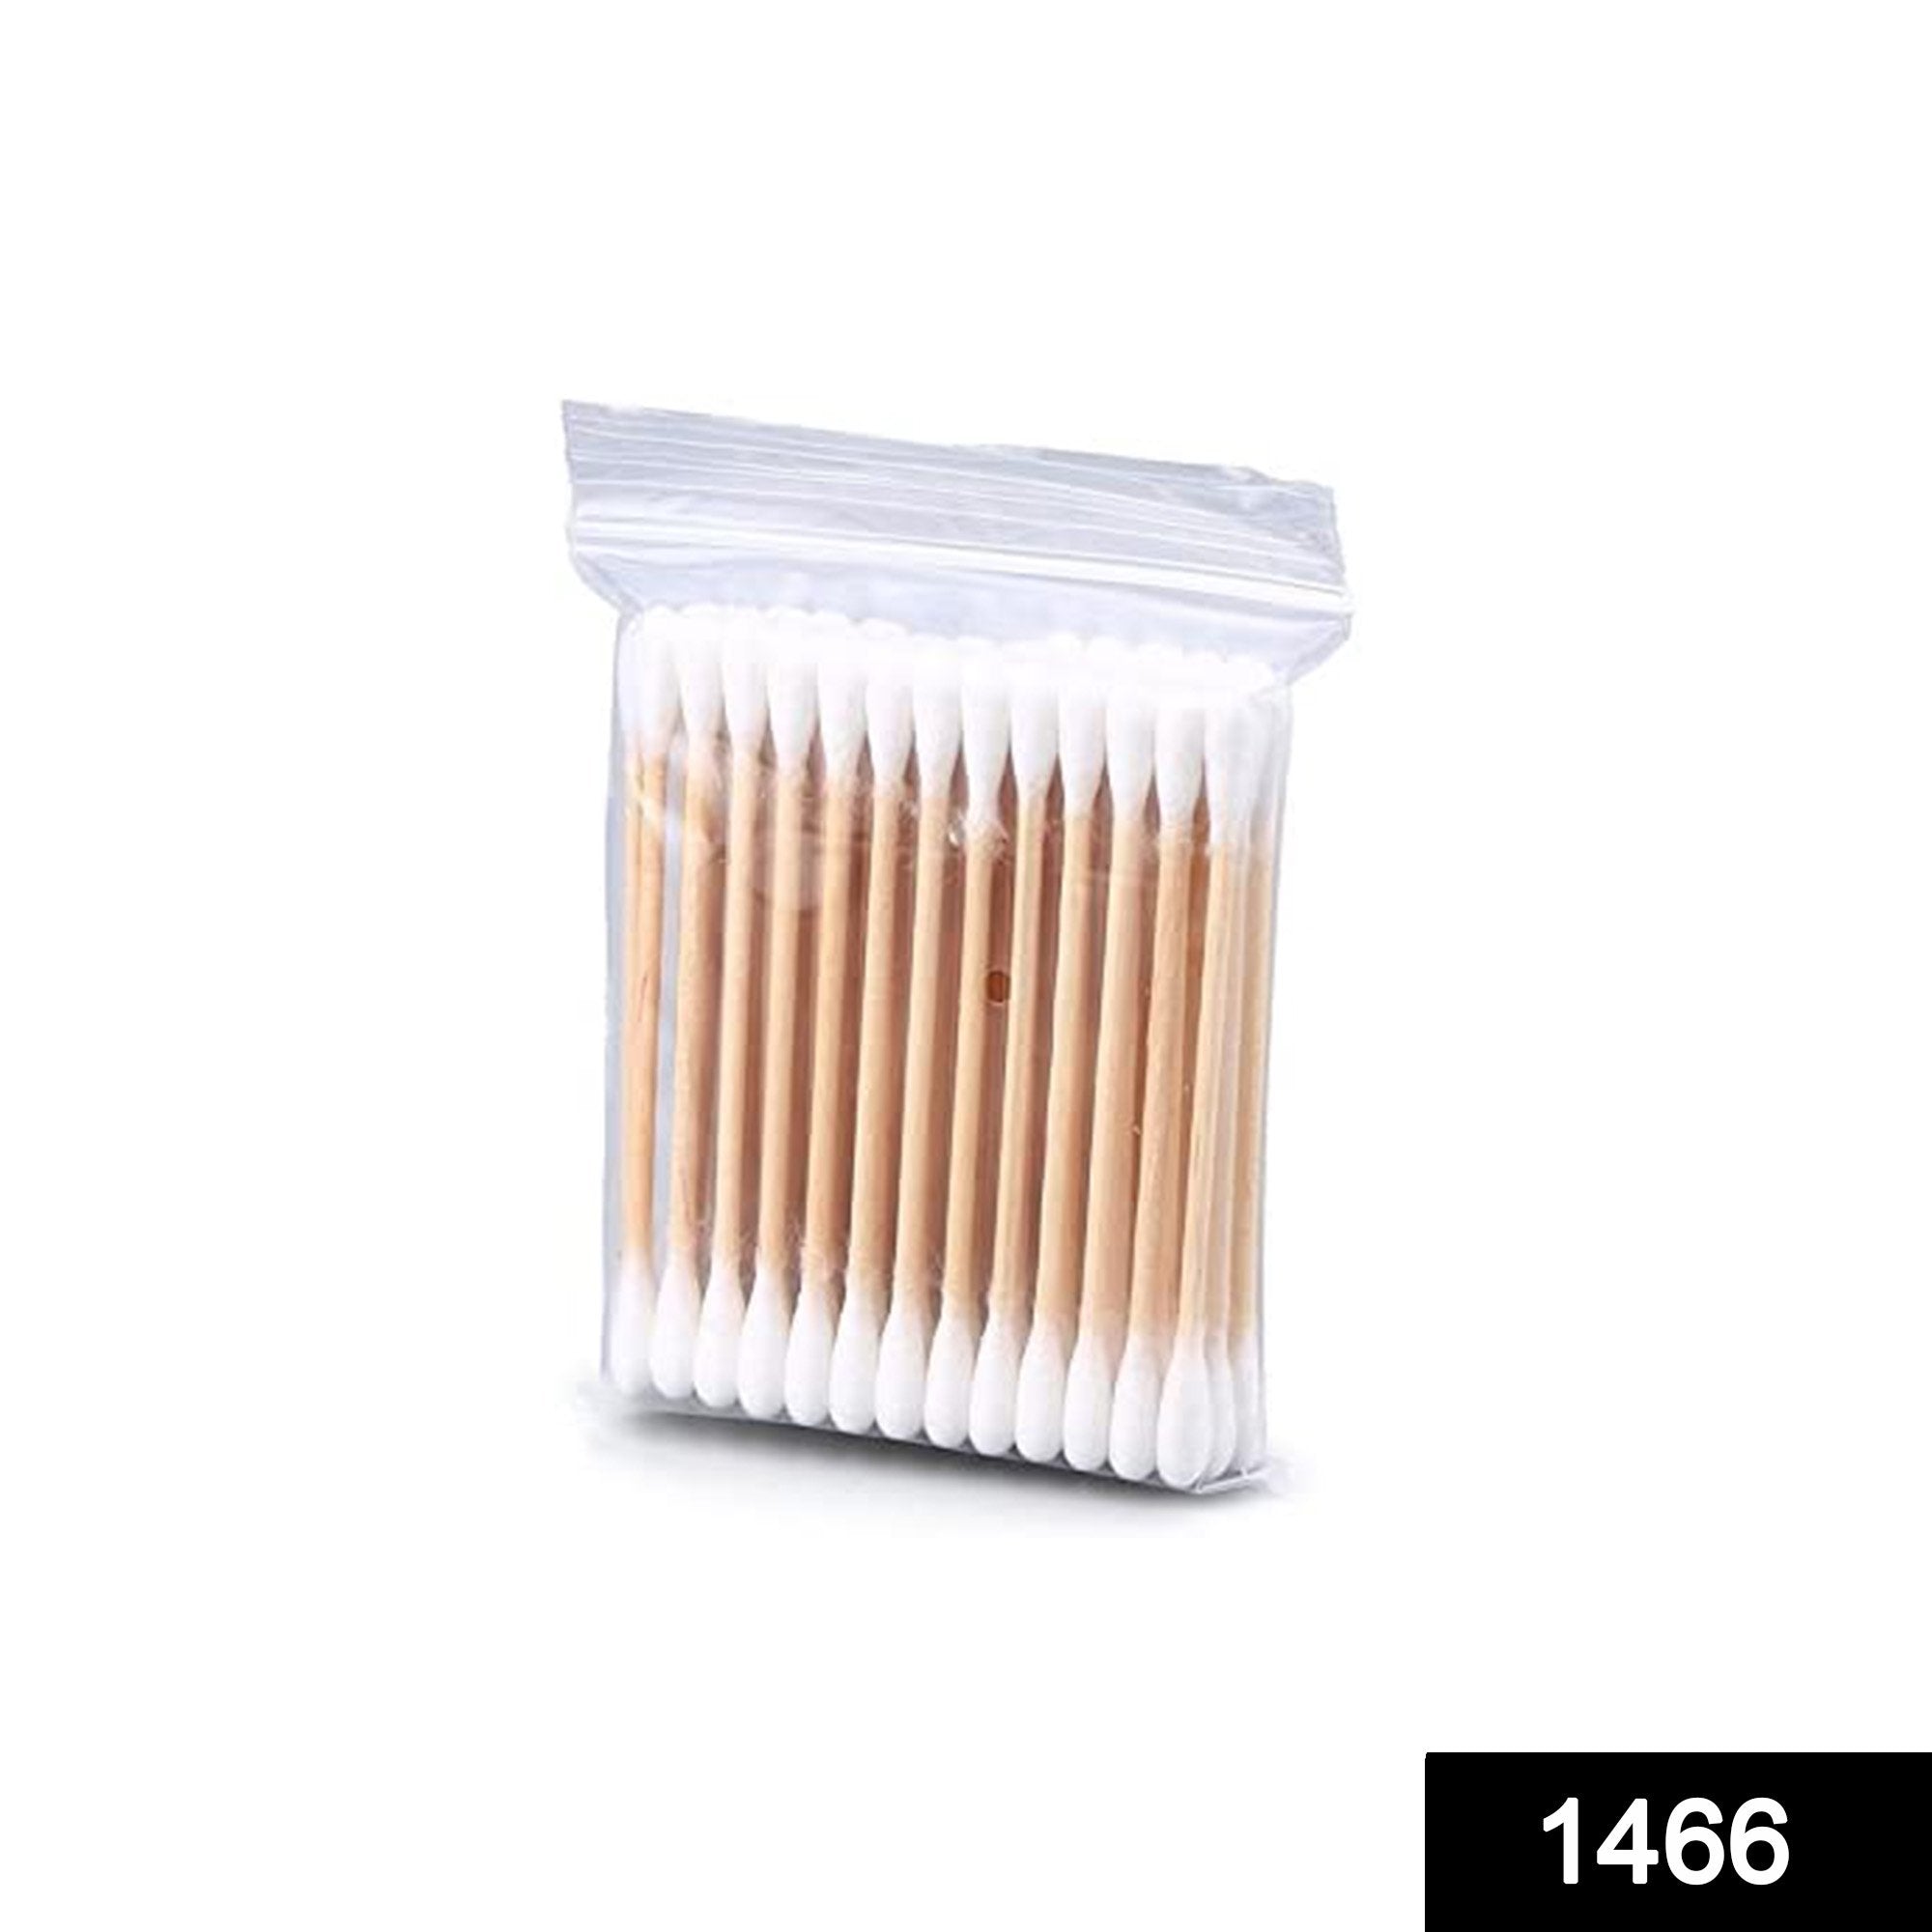 1466 Cotton Swabs With Wooden Sticks Biodegradable Cotton Buds - SkyShopy